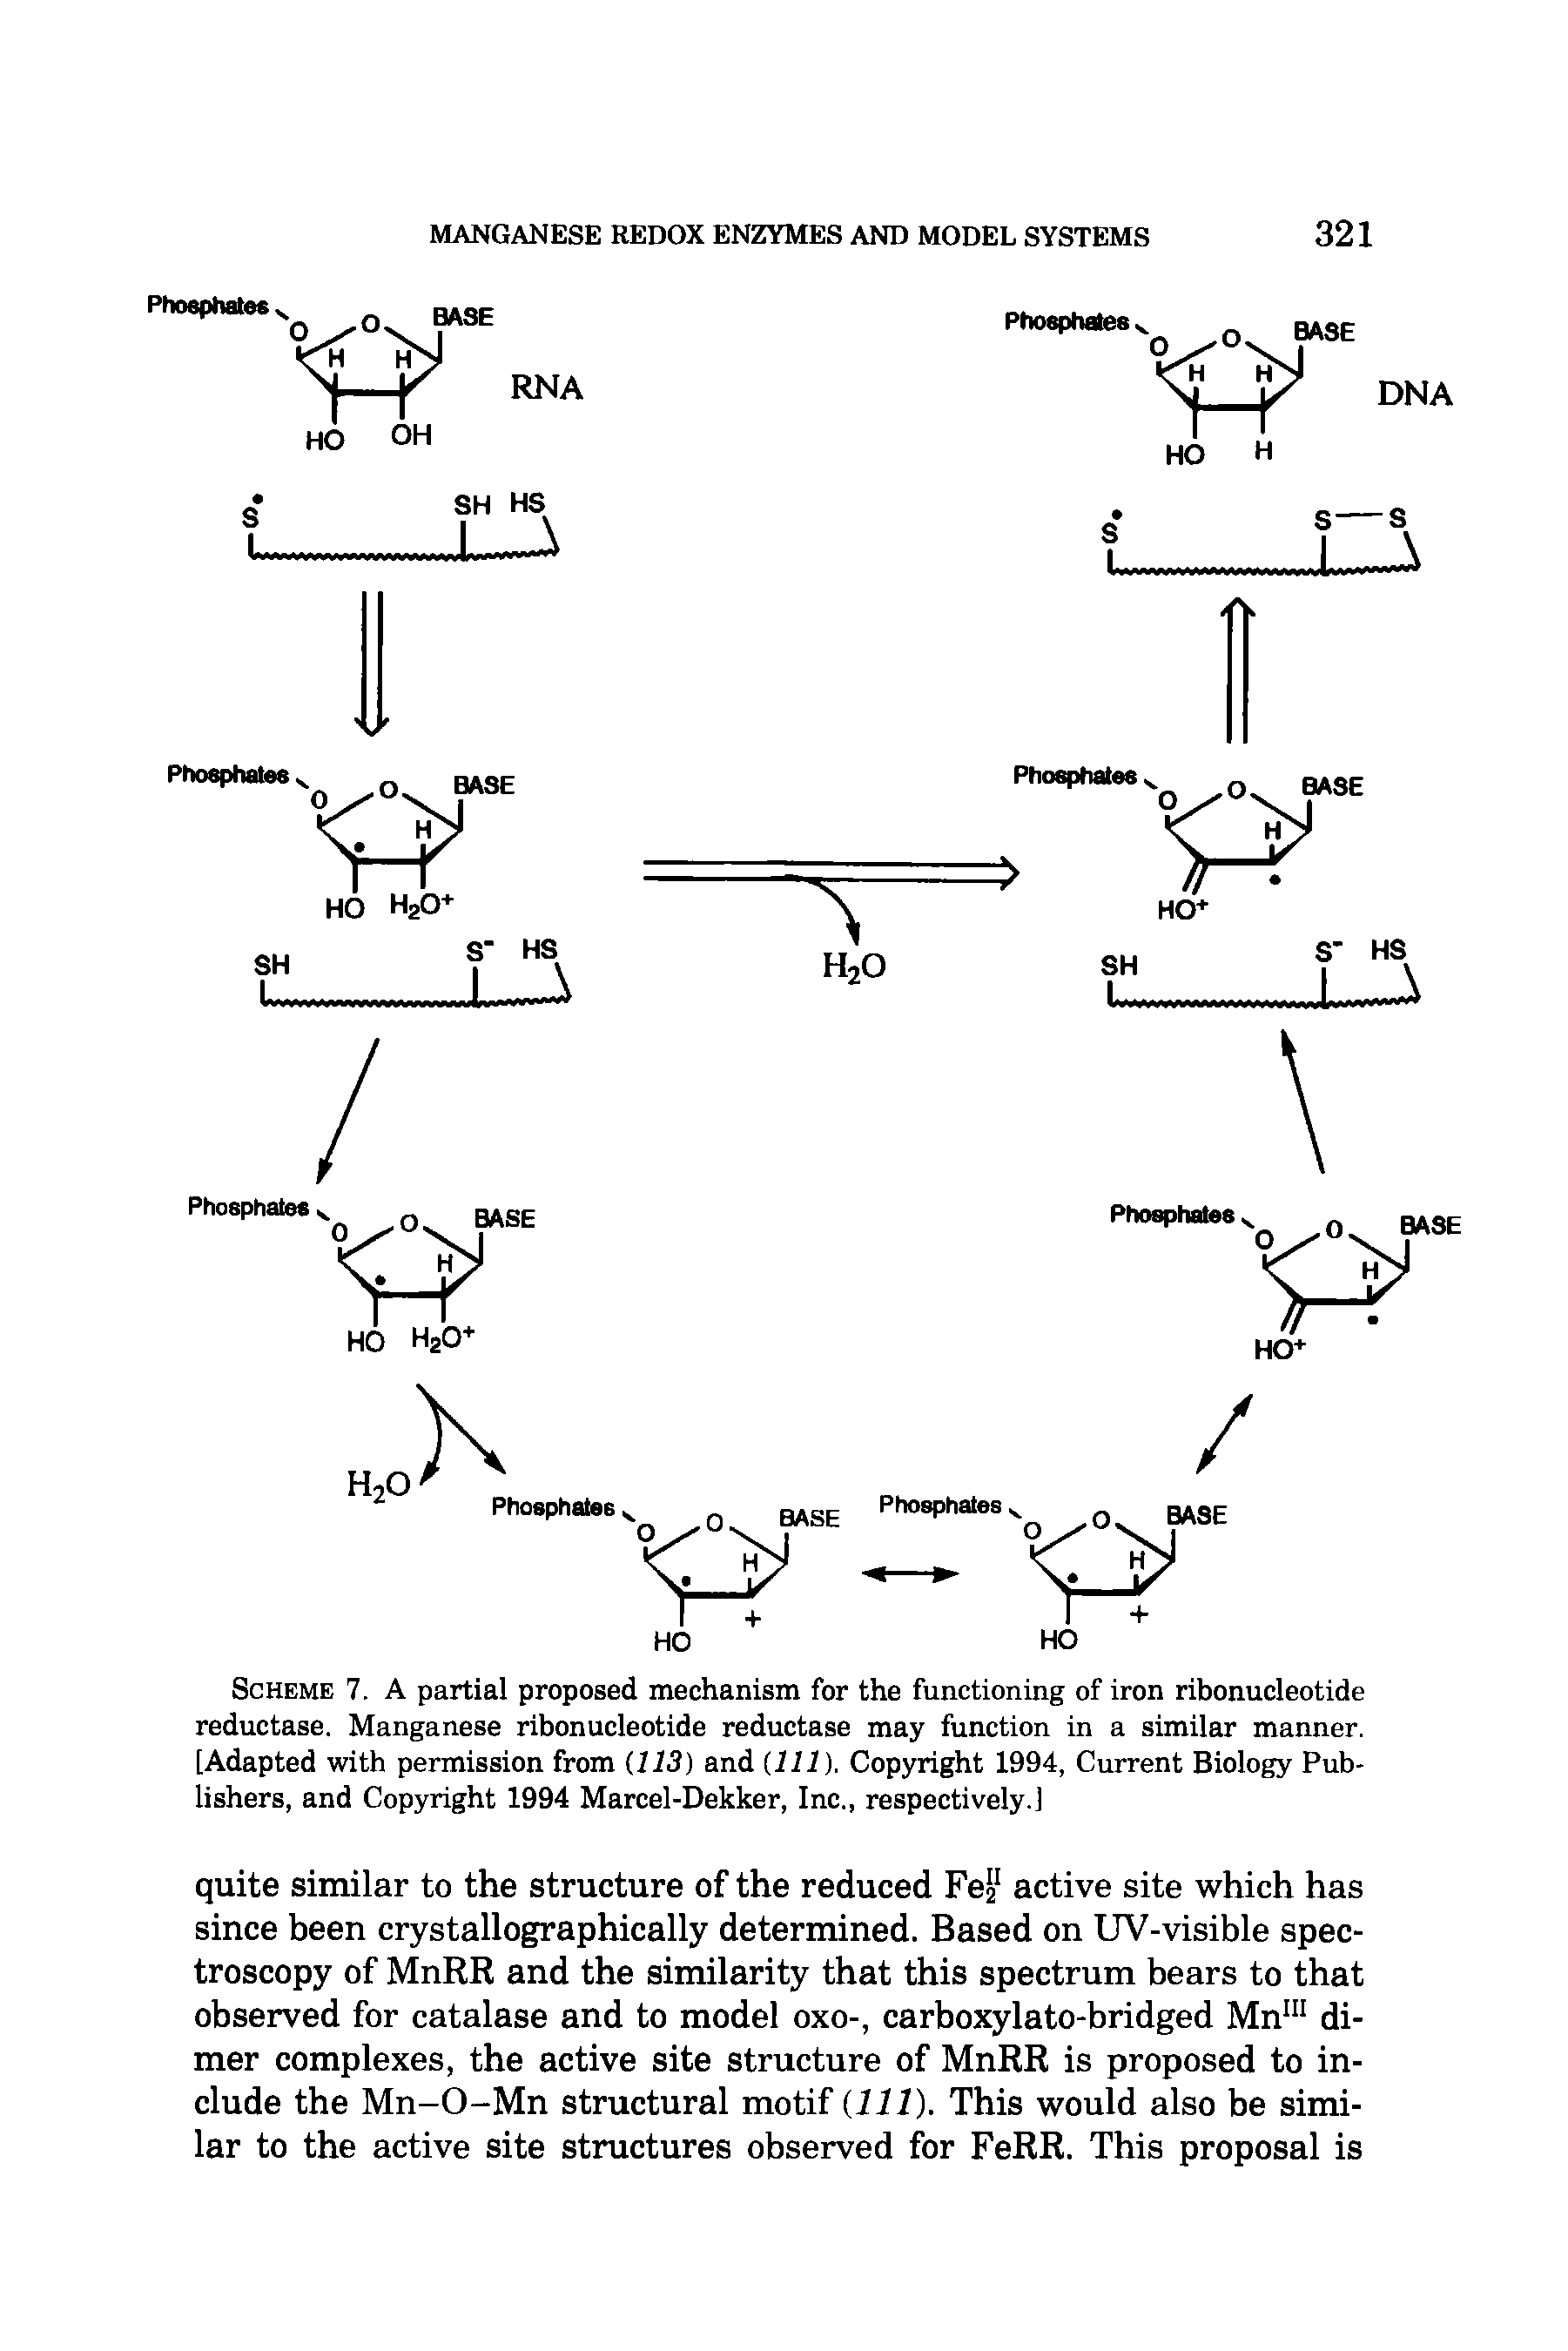 Scheme 7. A partial proposed mechanism for the functioning of iron ribonucleotide reductase. Manganese ribonucleotide reductase may function in a similar manner. [Adapted with permission from (113) and (111). Copyright 1994, Current Biology Publishers, and Copyright 1994 Marcel-Dekker, Inc., respectively.]...